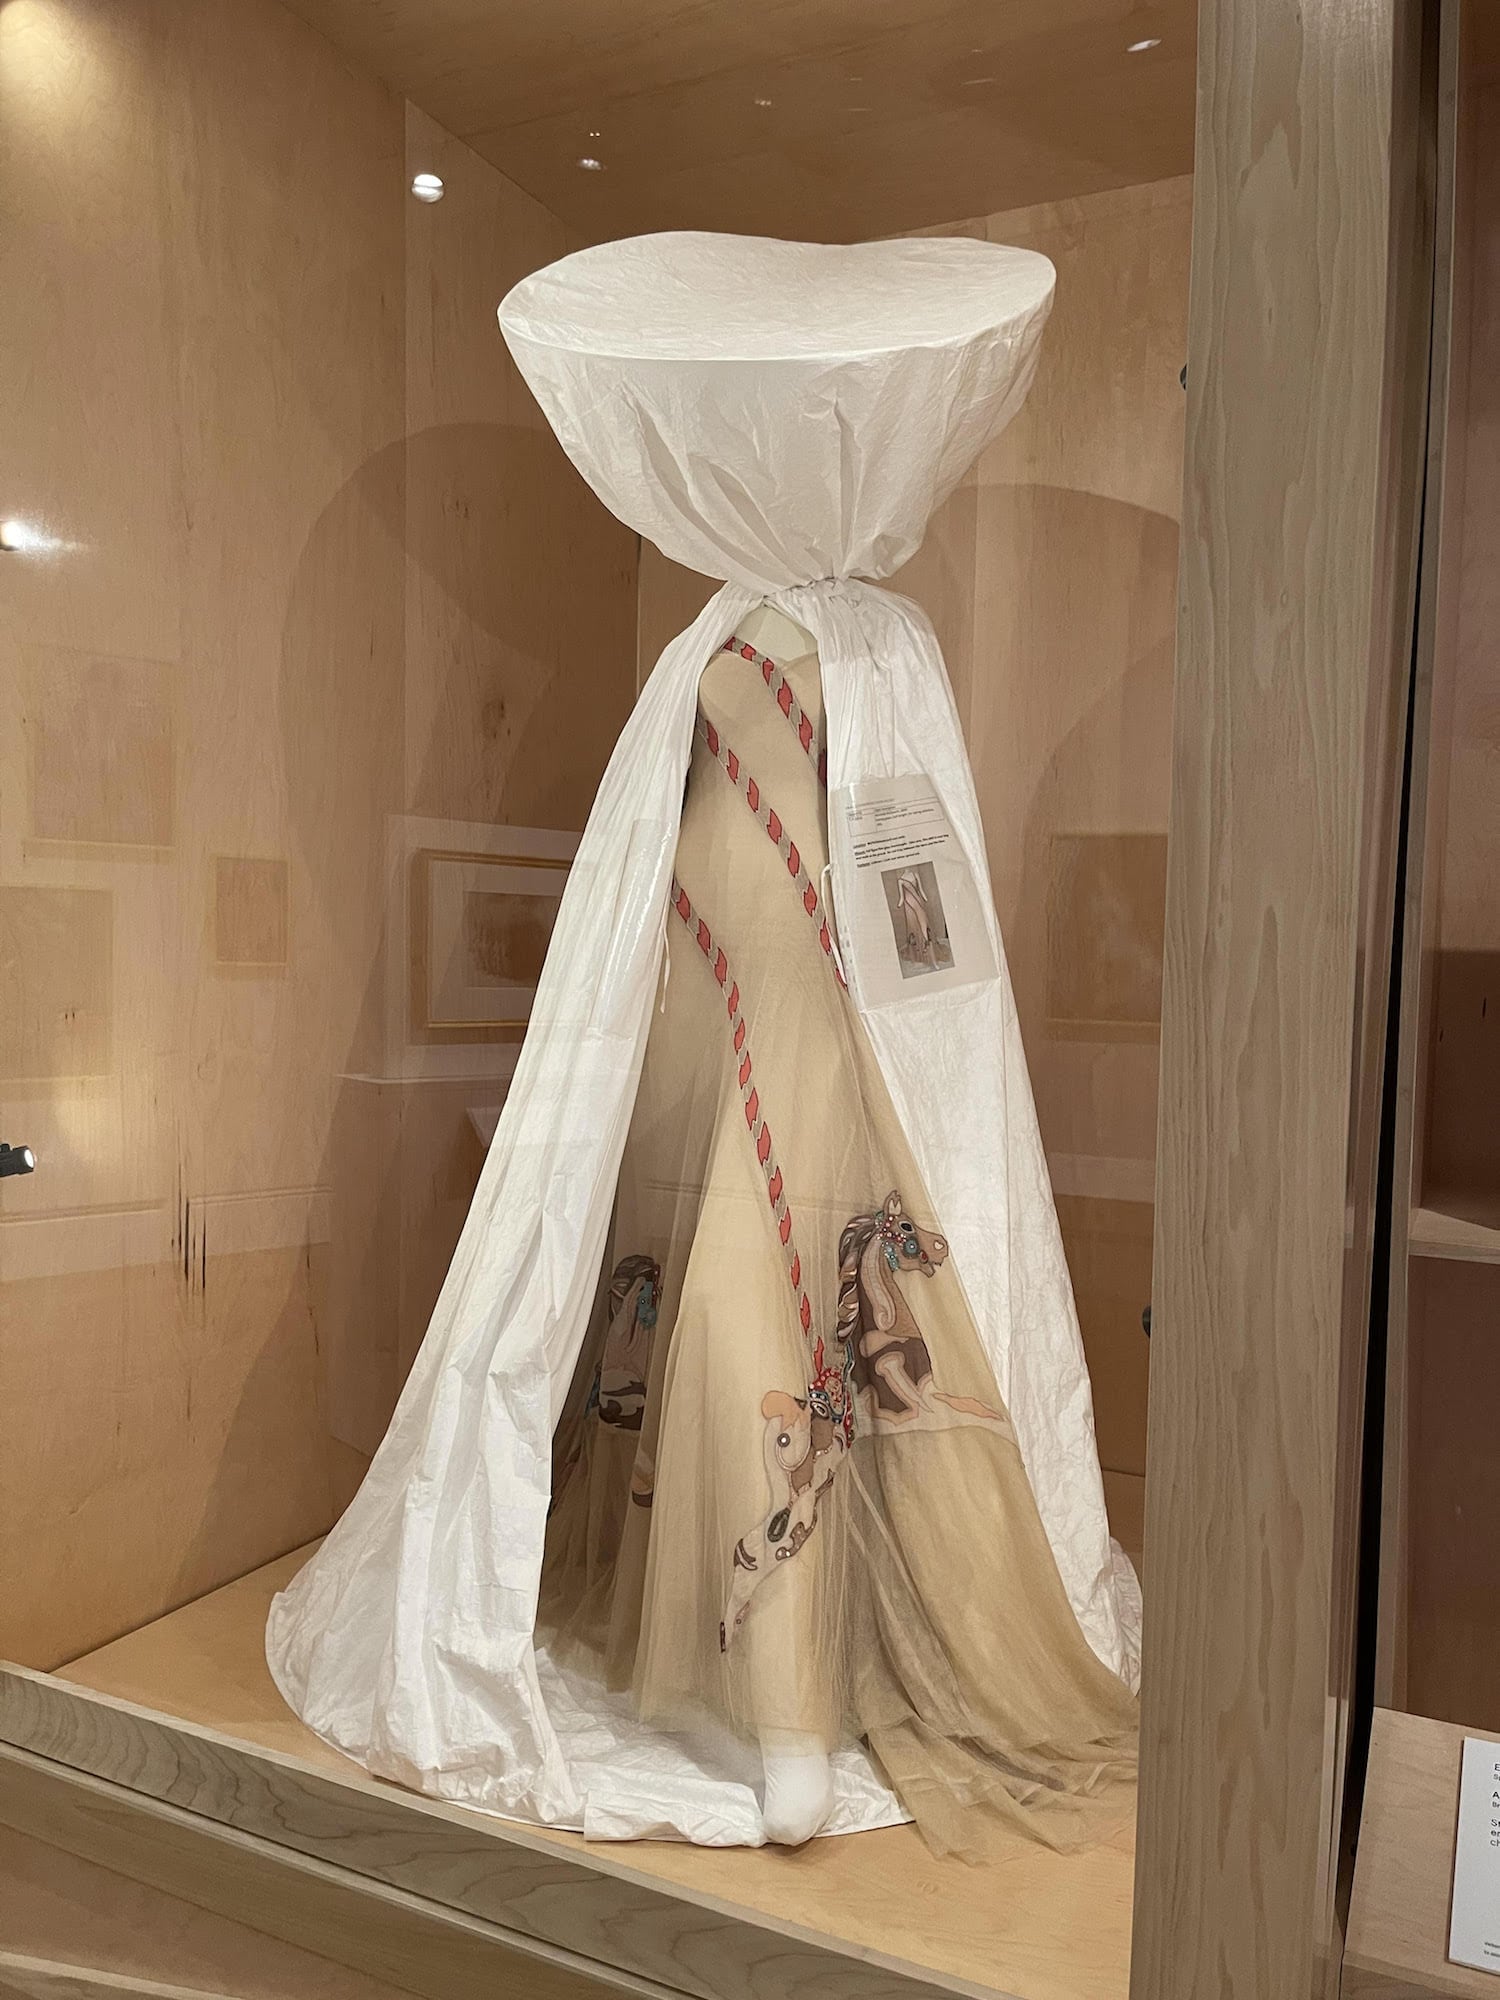 Alexander McQueen, Evening Gown, Spring 2005 in Tim Walker: Wonderful Things at the Getty Center